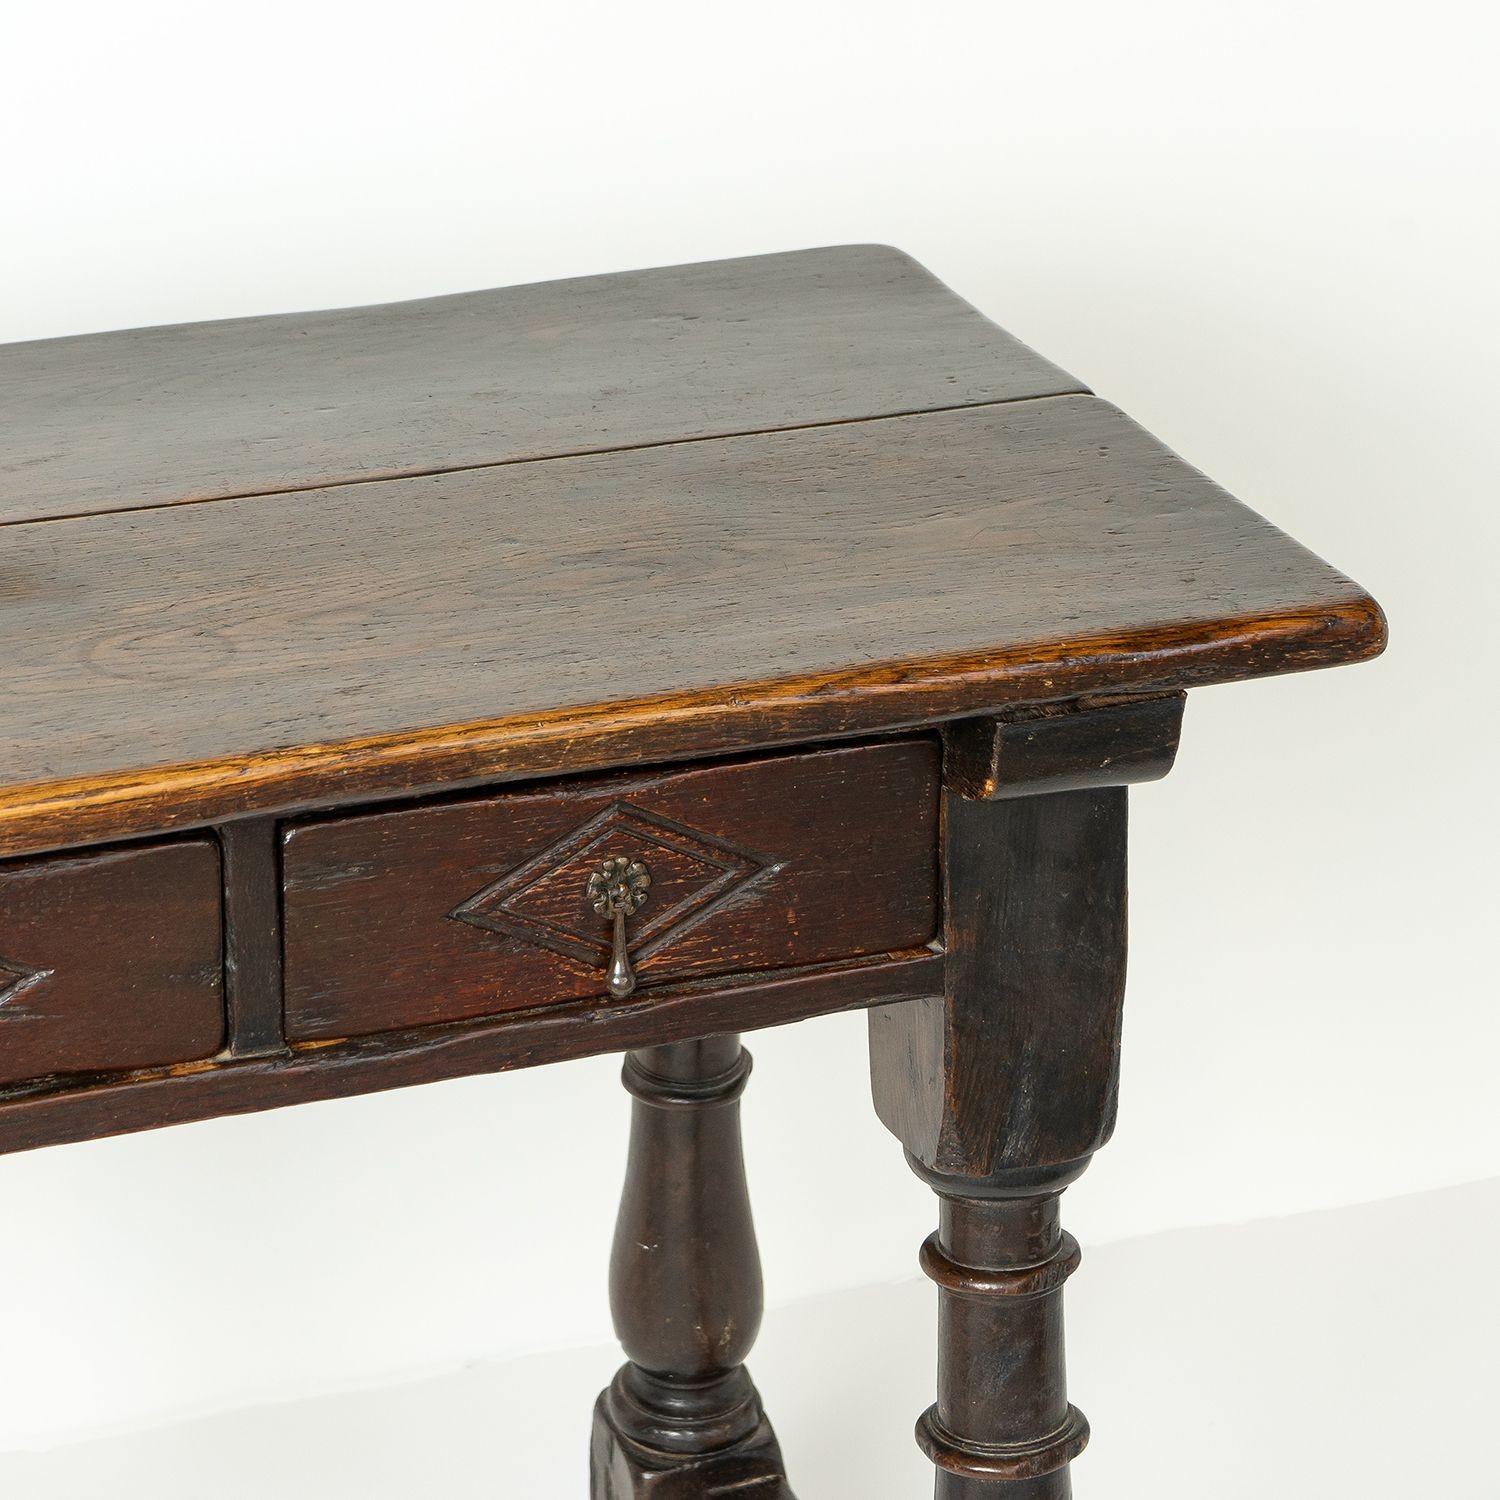 Antique Chunky Spanish Baroque Oak Side Table with Baluster Legs, 17th Century For Sale 2